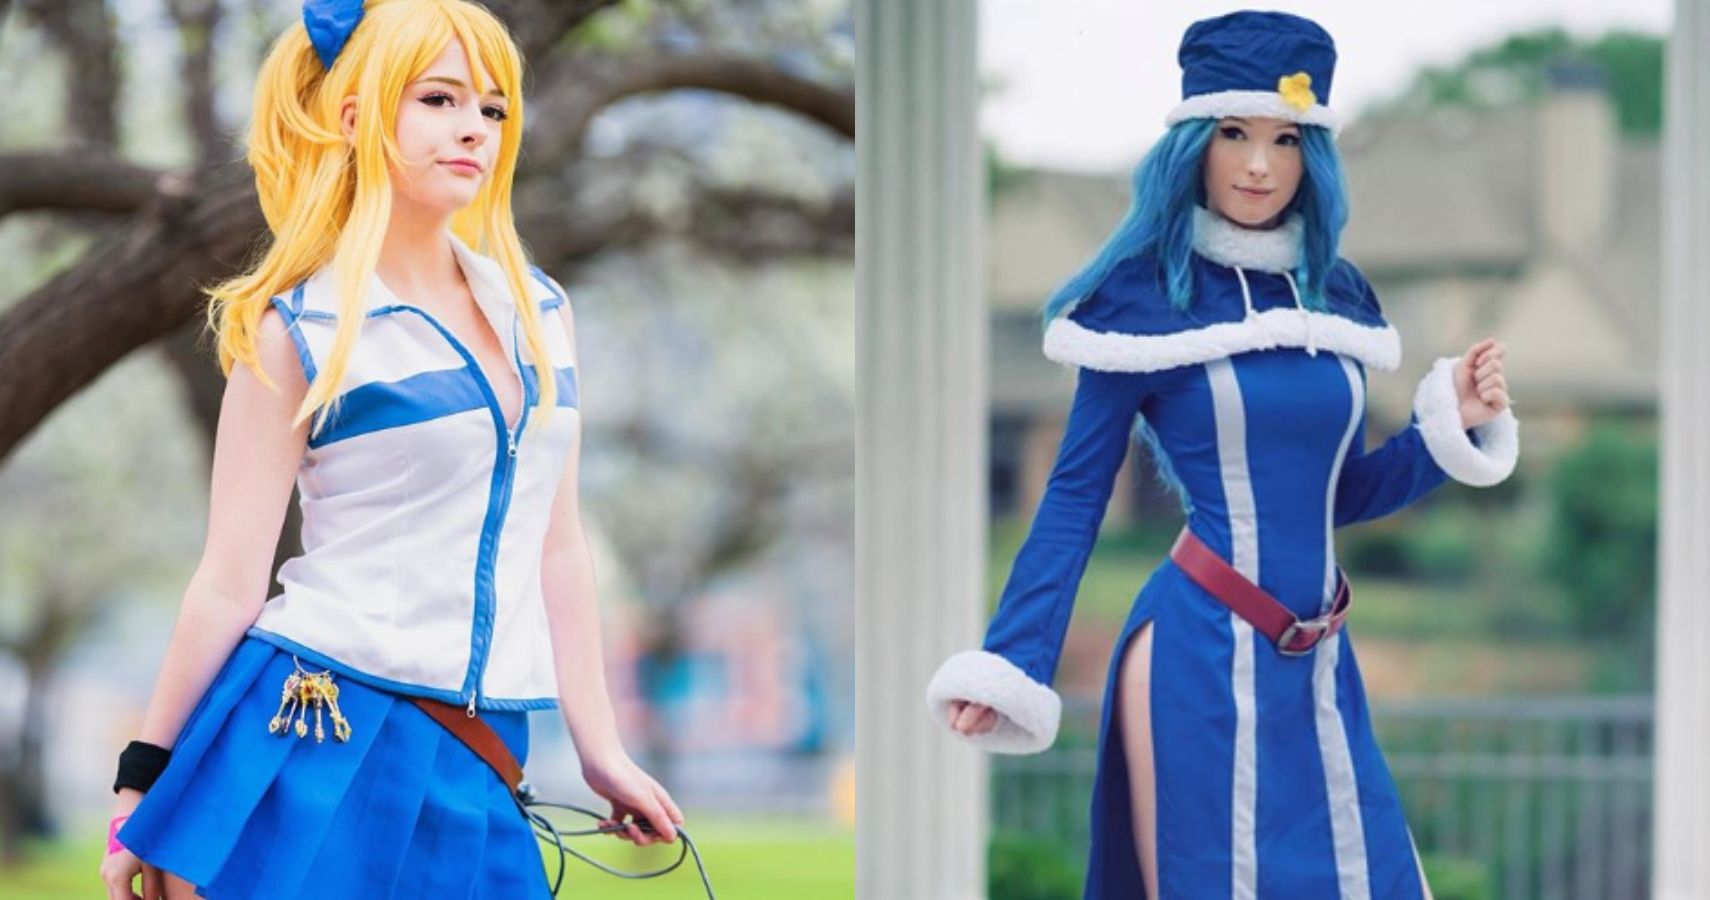 Fairy Tail Cosplay Magically Brings Lucy to Life